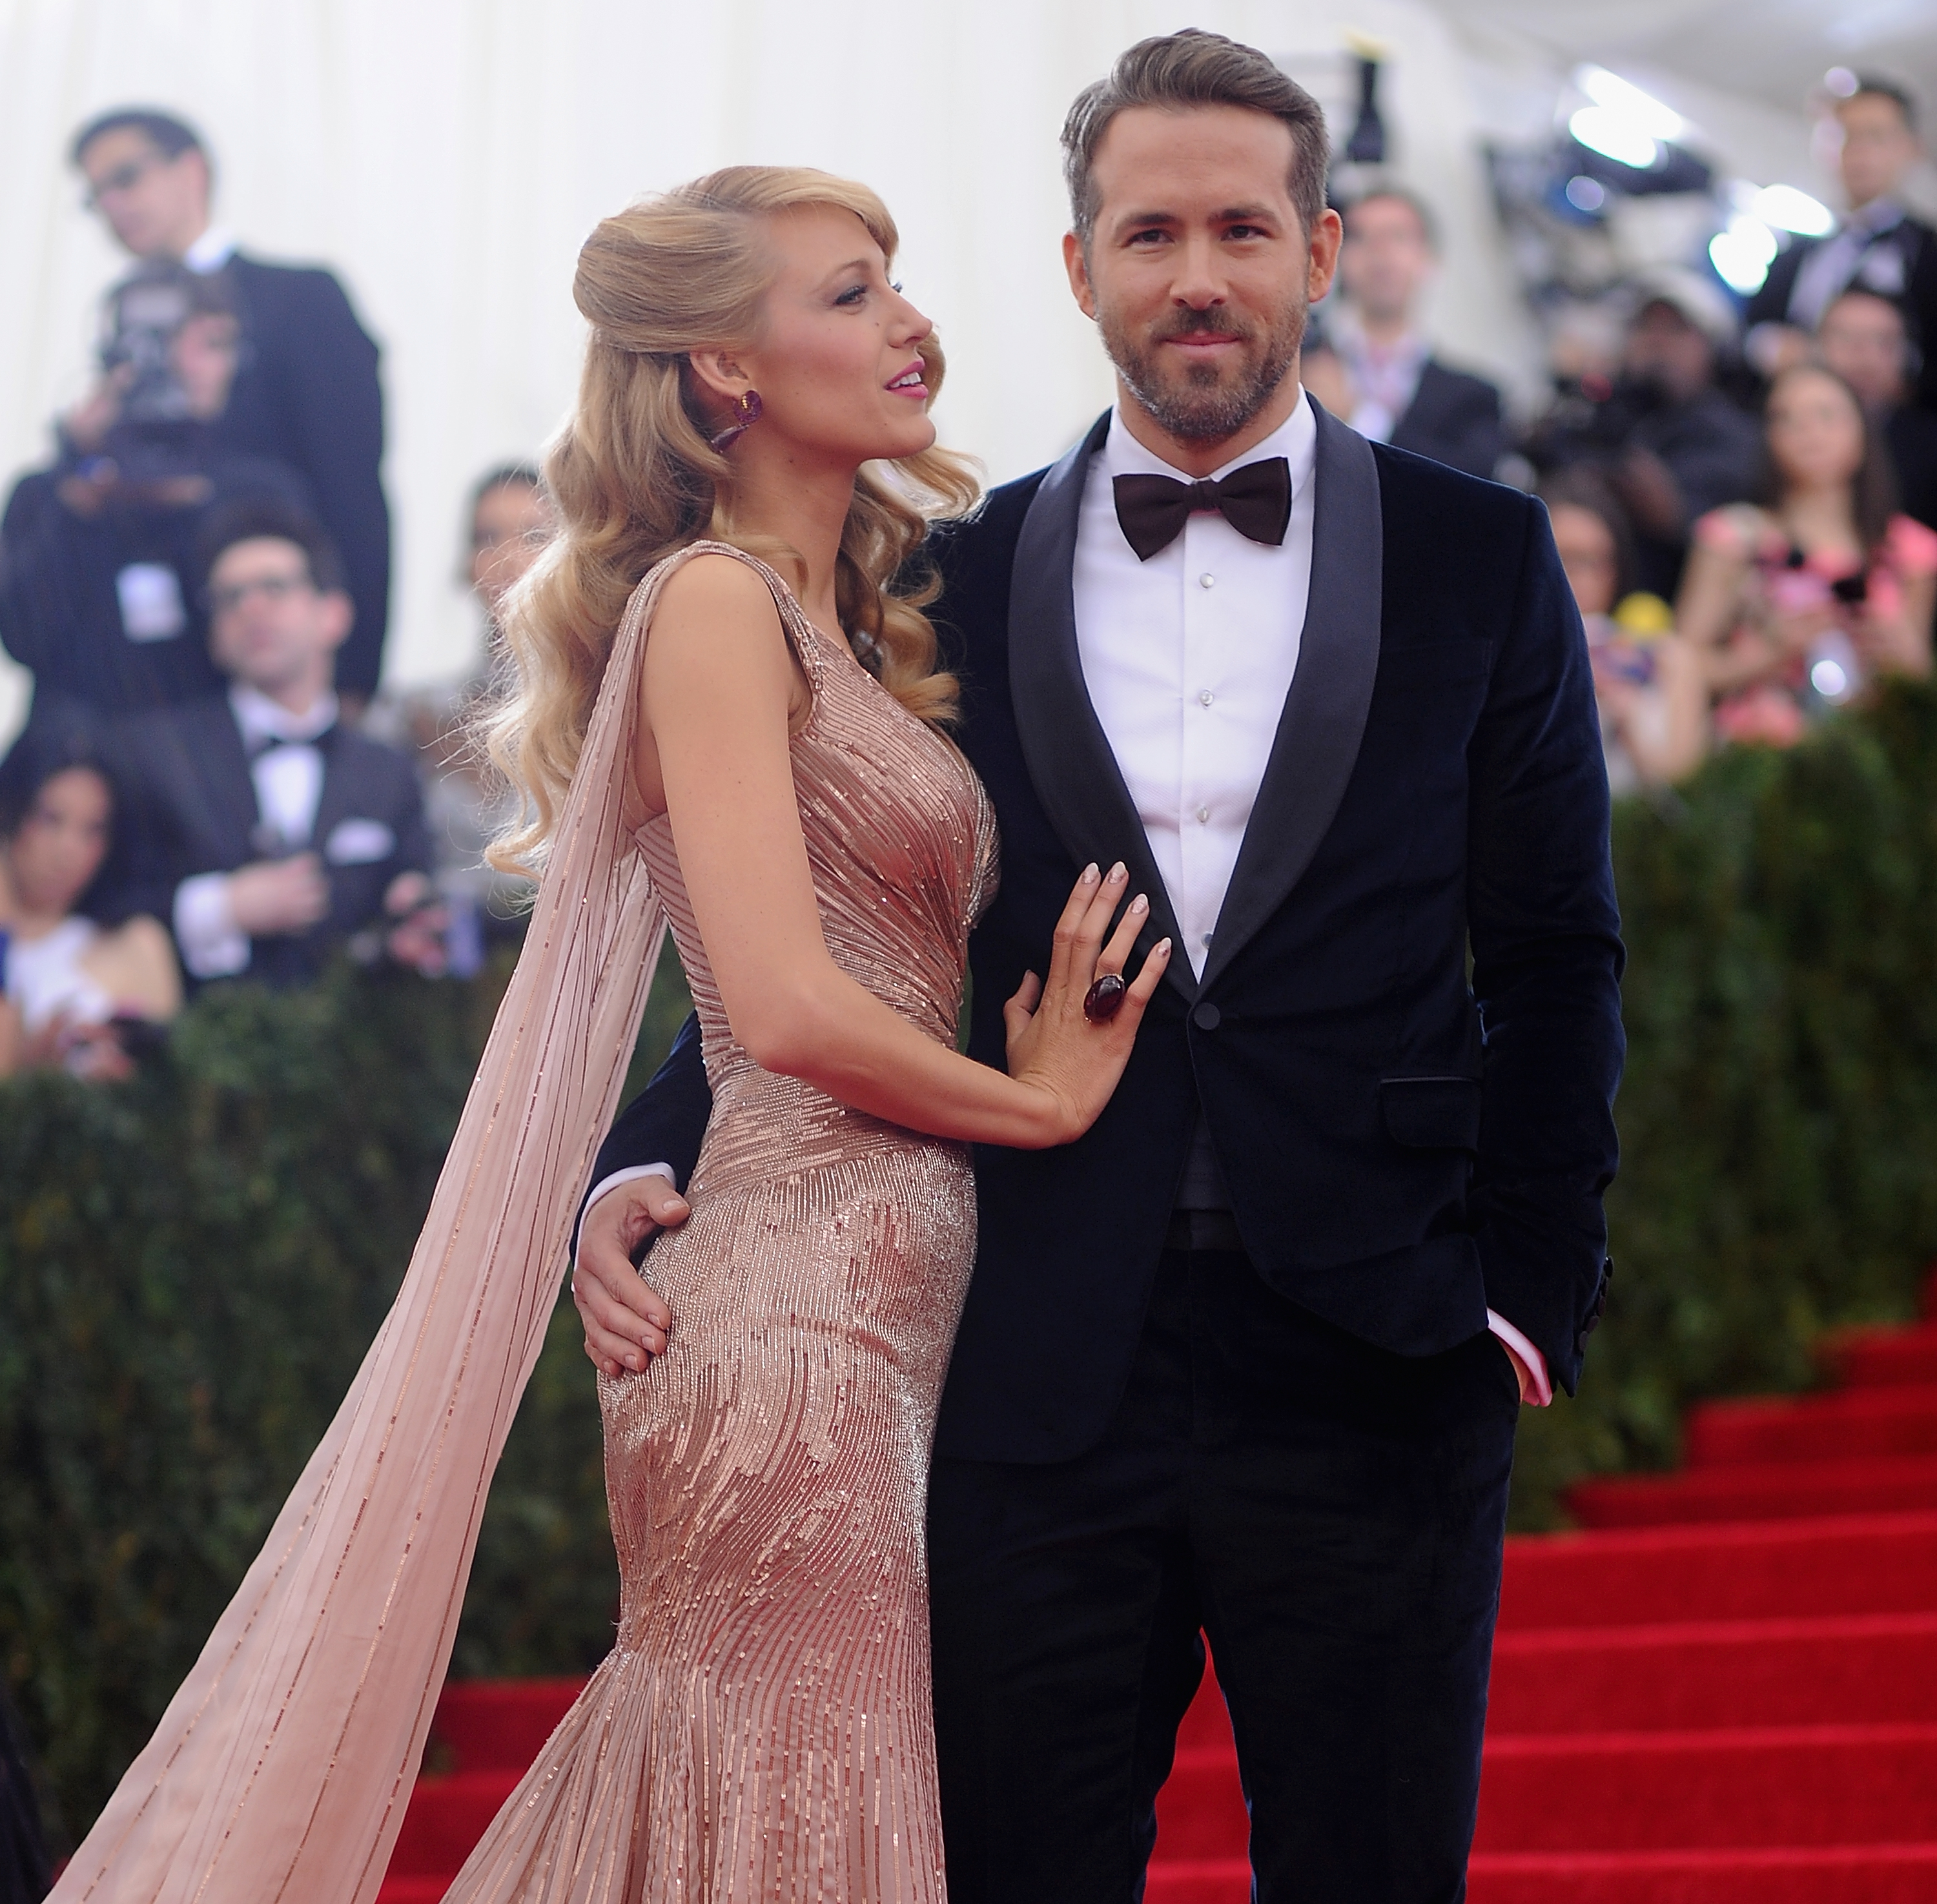 Blake Lively and Ryan Reynolds attend the "Charles James: Beyond Fashion" Costume Institute Gala at the Metropolitan Museum of Art, on May 5, 2014, in New York City. | Source: Getty Images